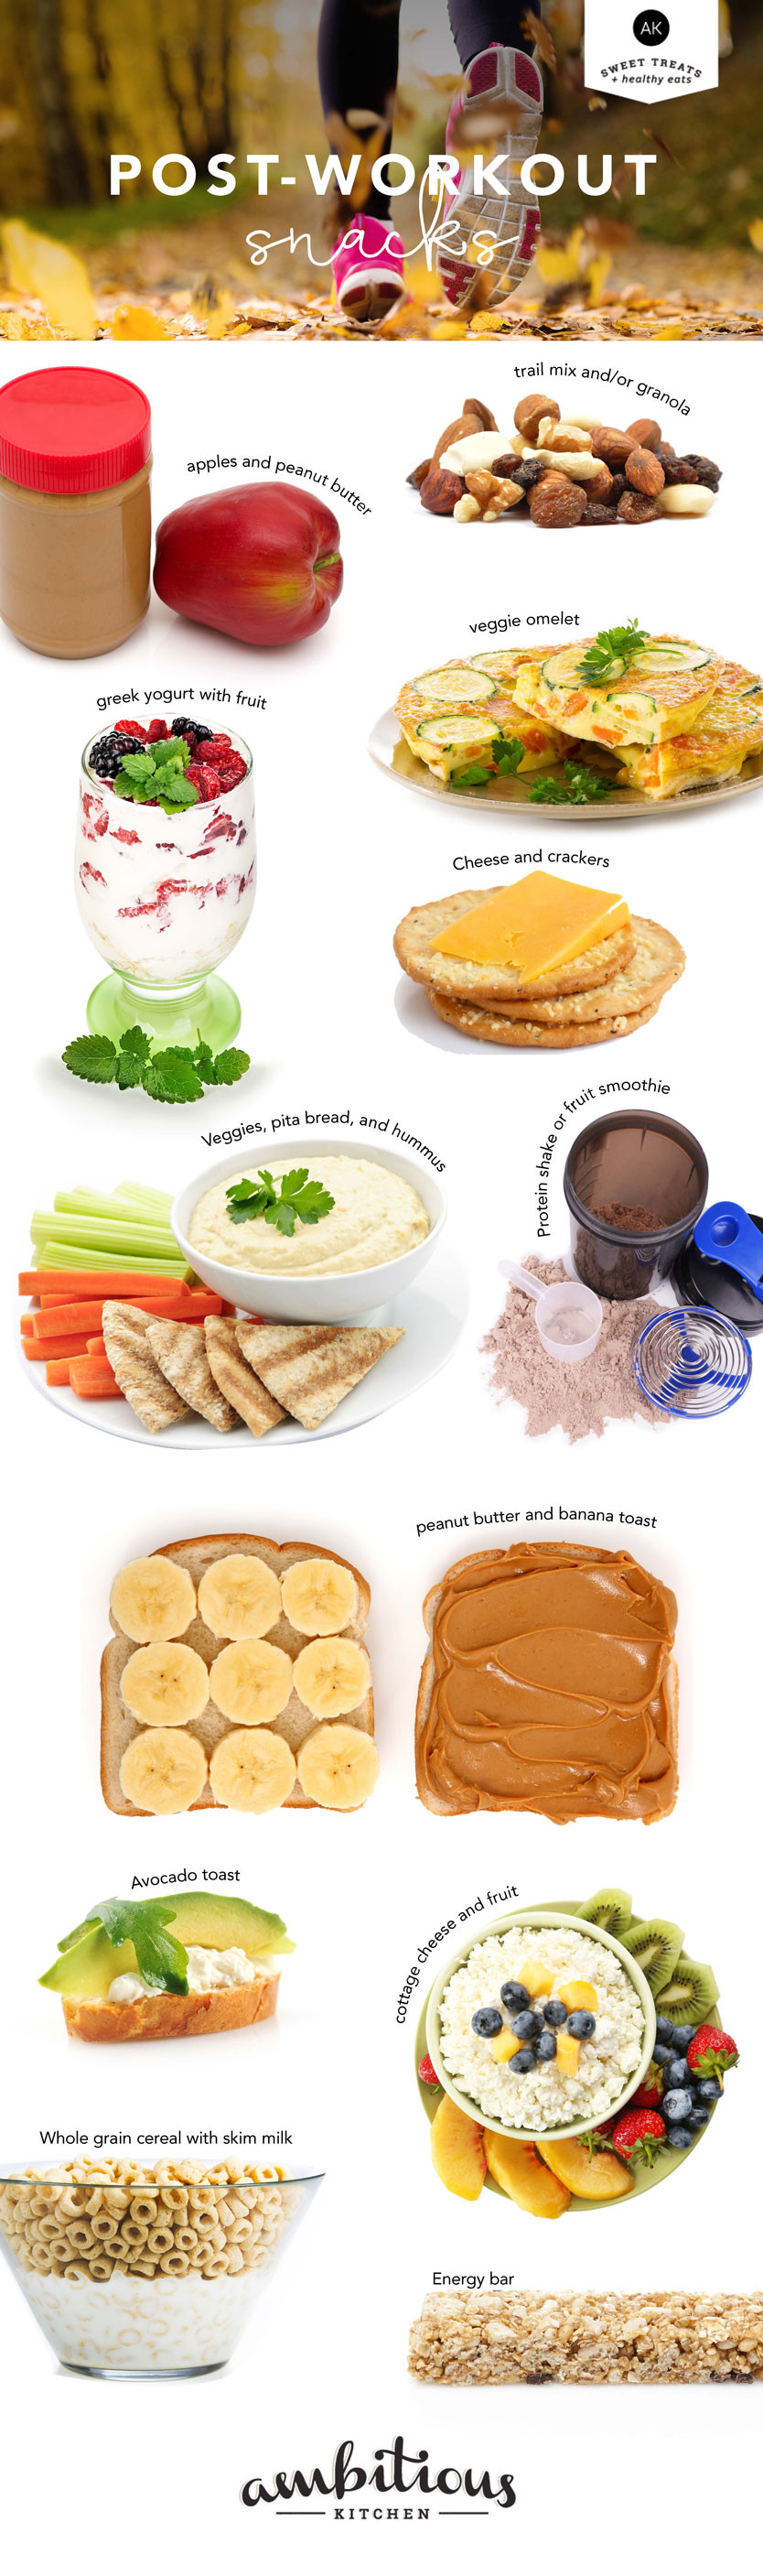 Healthy Snacks After Workout
 Wellness Wednesday 12 Healthy Post Workout Snacks When